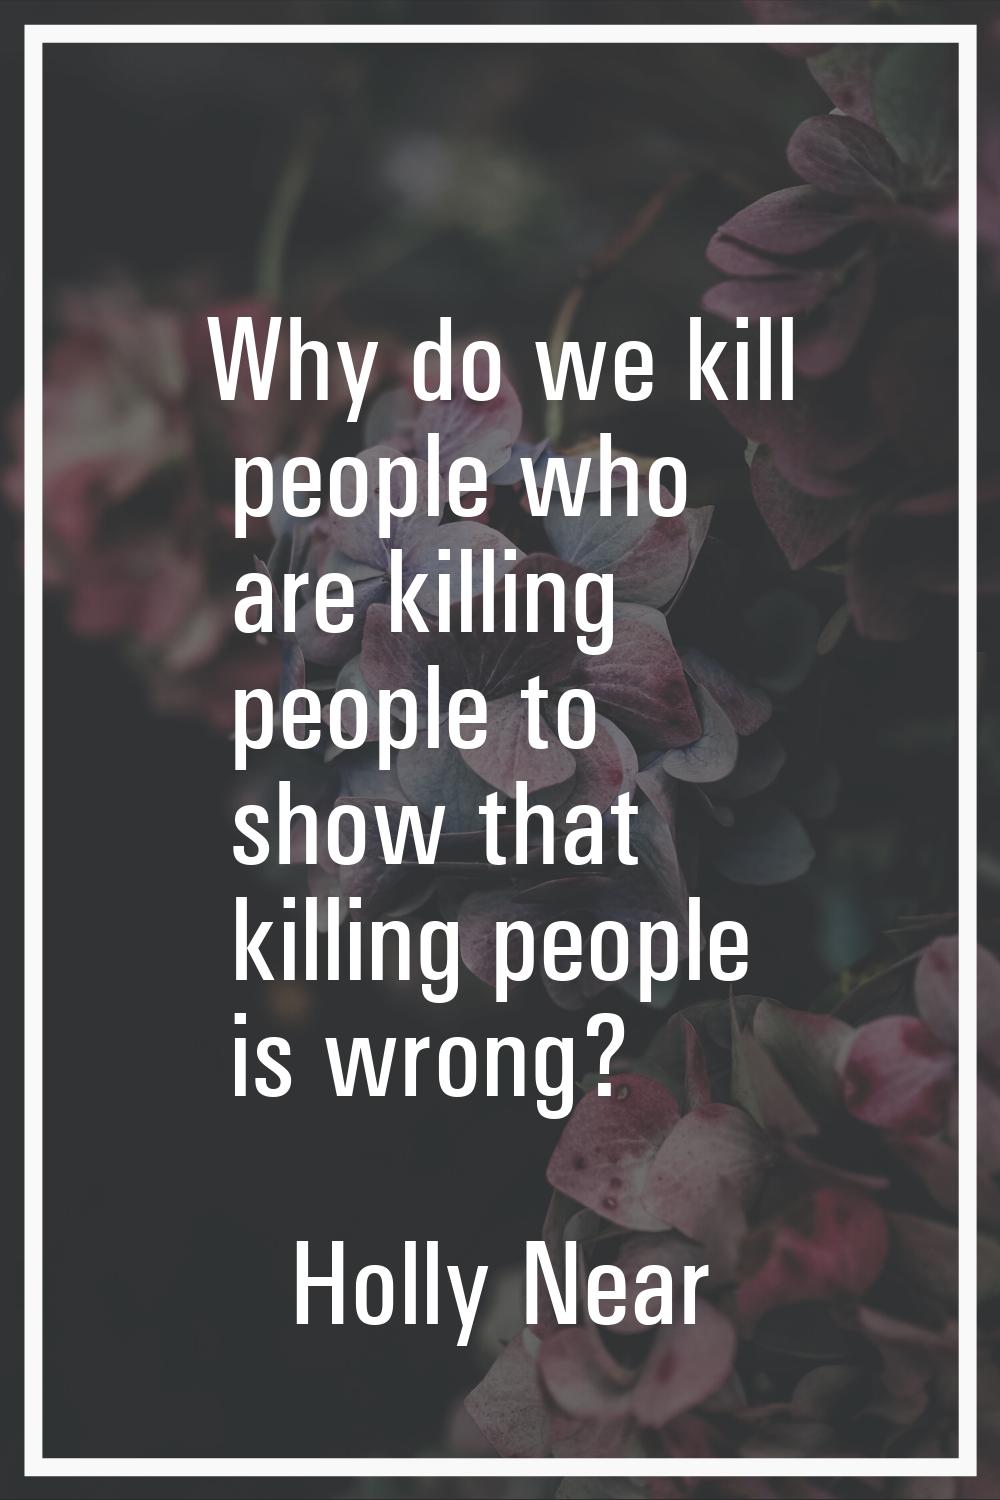 Why do we kill people who are killing people to show that killing people is wrong?